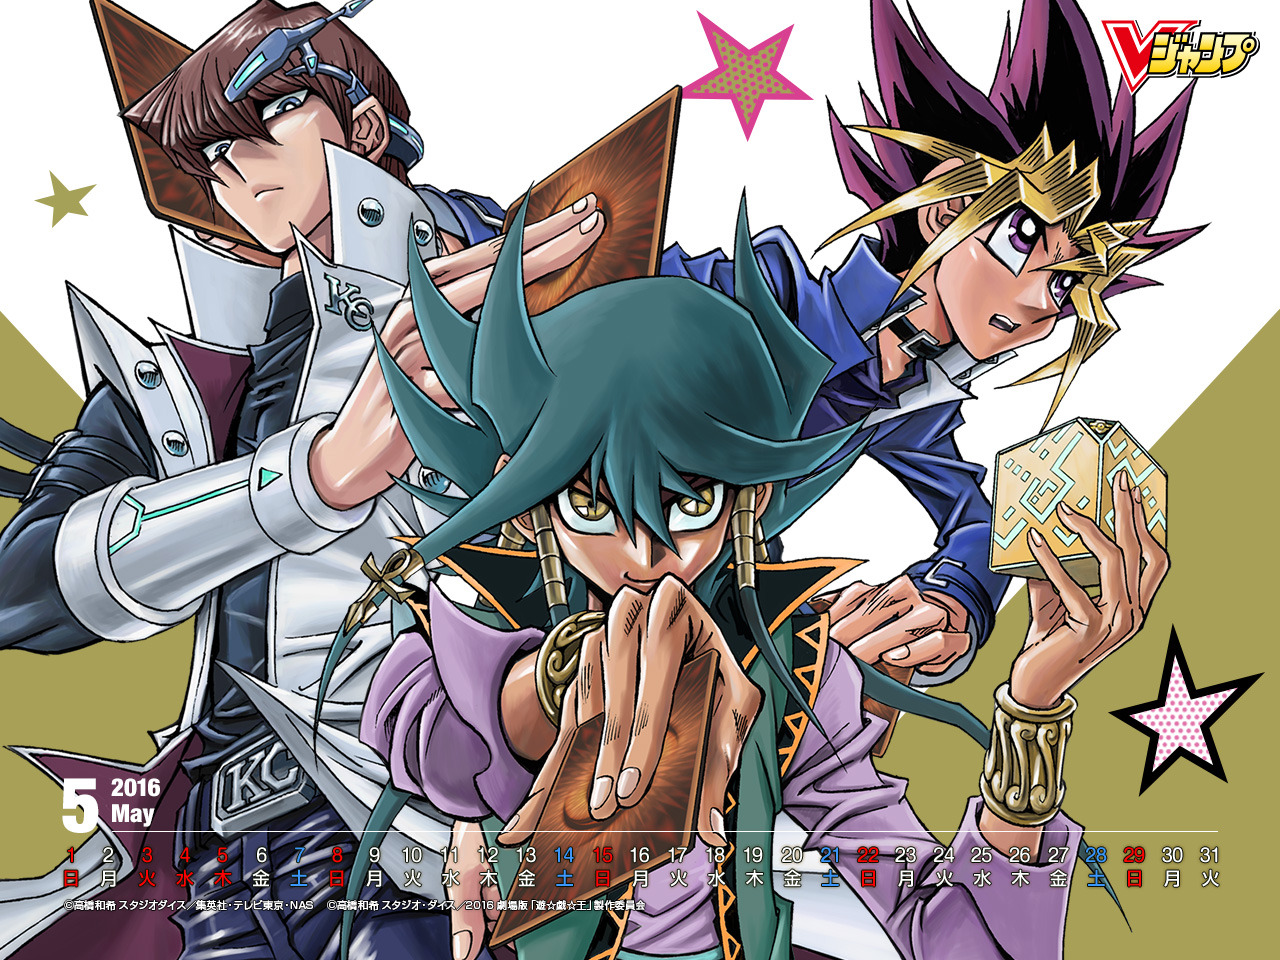 Download This For Your May Wallpaper Here - Yu Gi Oh The Dark Side Of Dimensions Manga - HD Wallpaper 